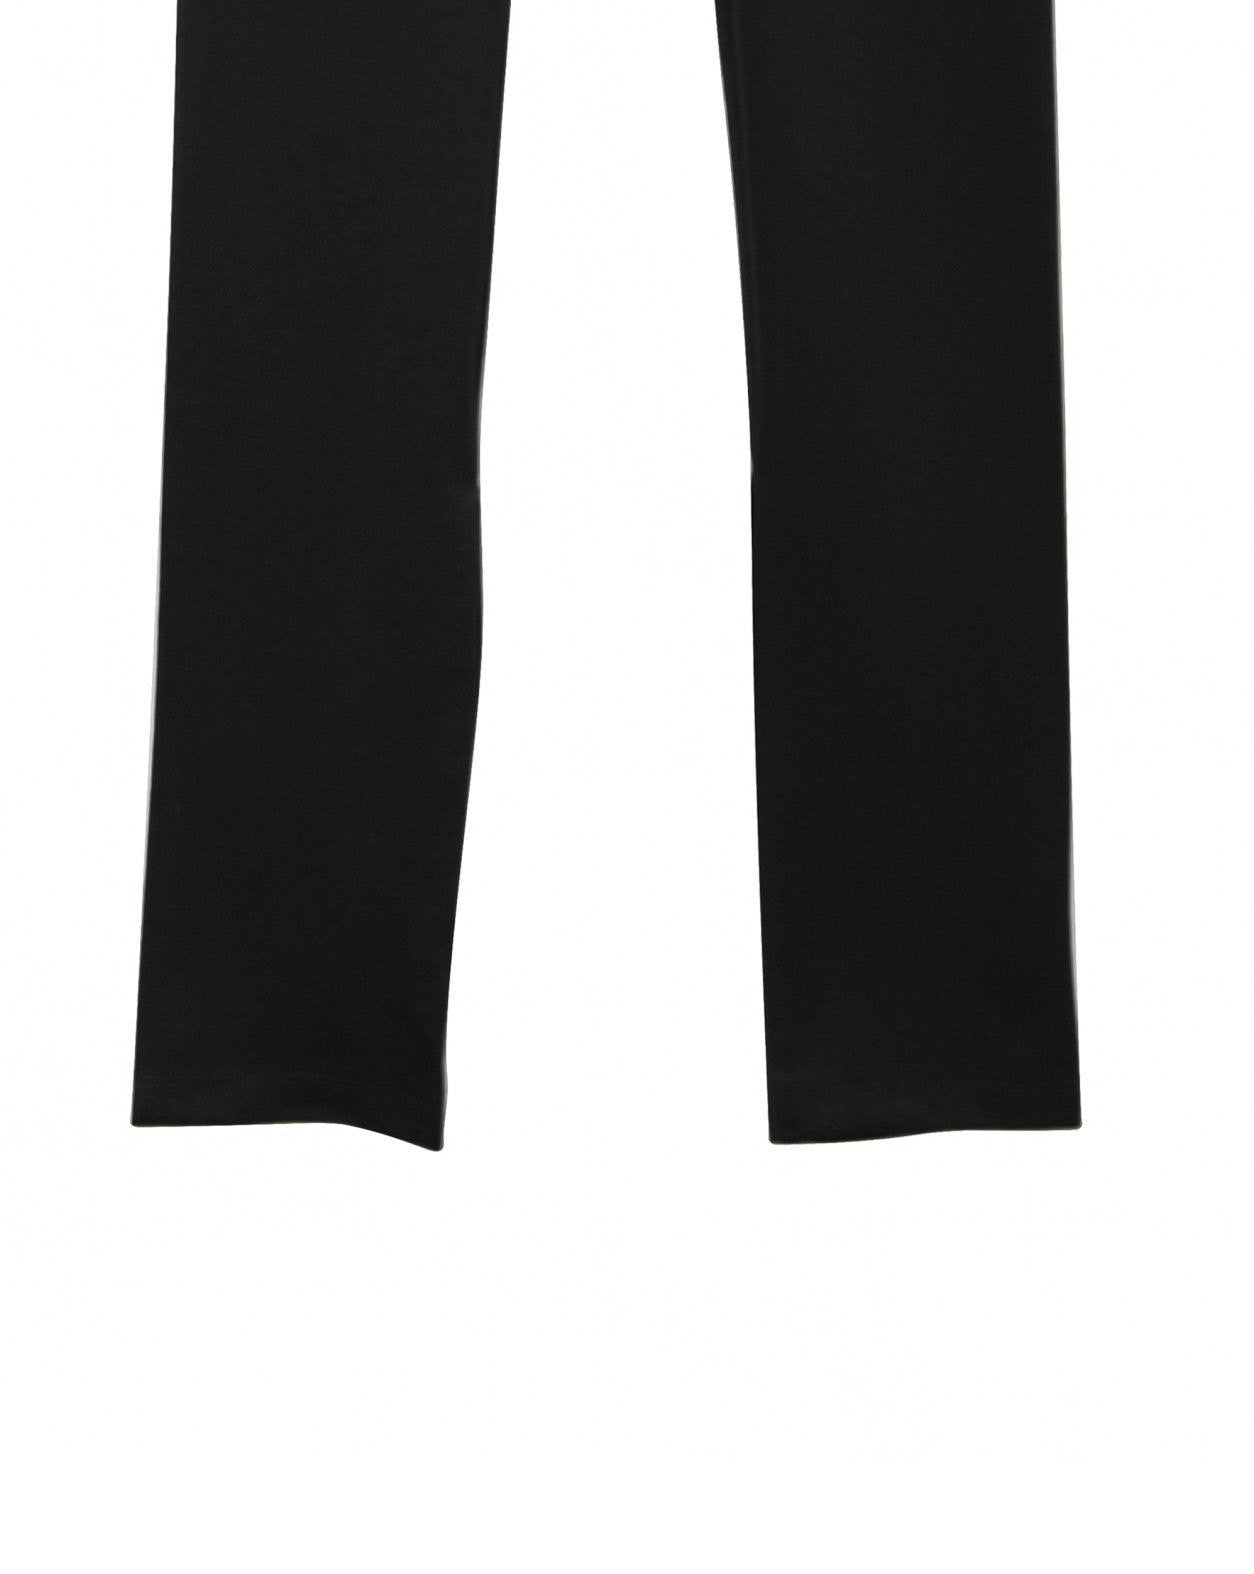 【PAPERMOON ペーパームーン】SS / Cut Out Slit Detail Flared Pants